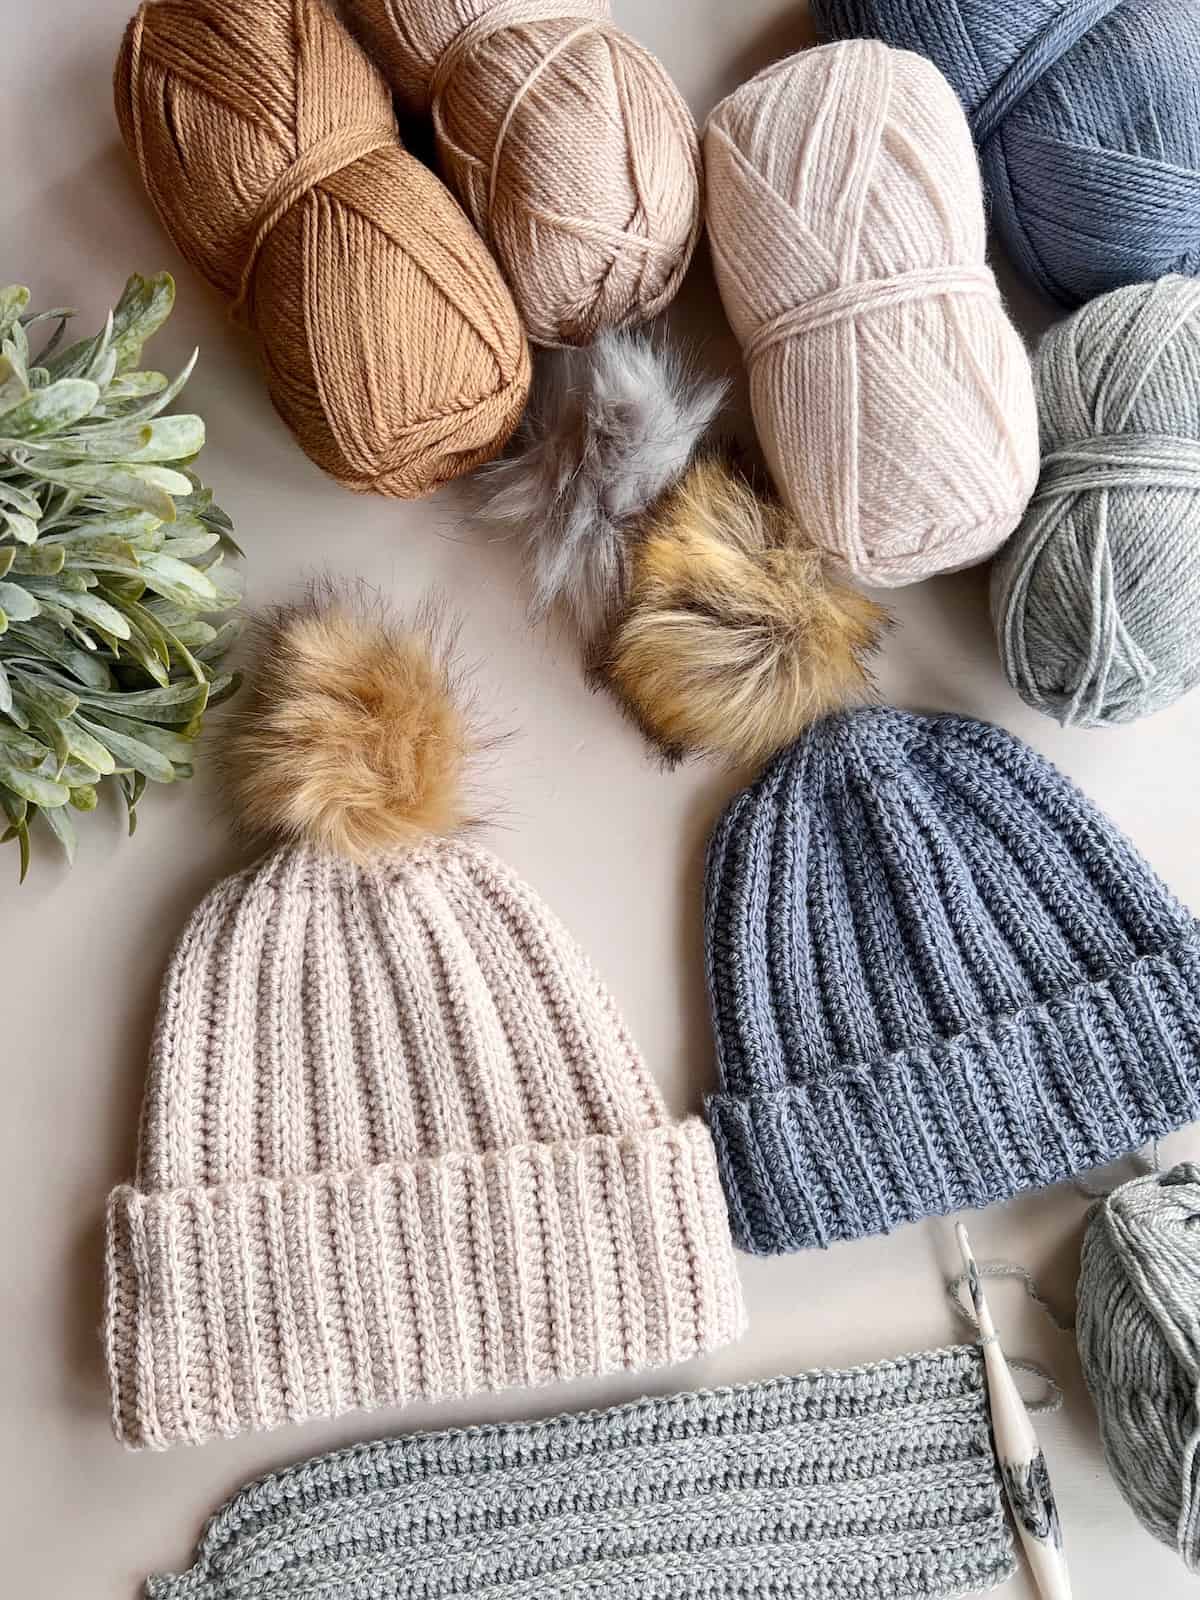 Hats, yarn, and knitting needles are laid out on a table.